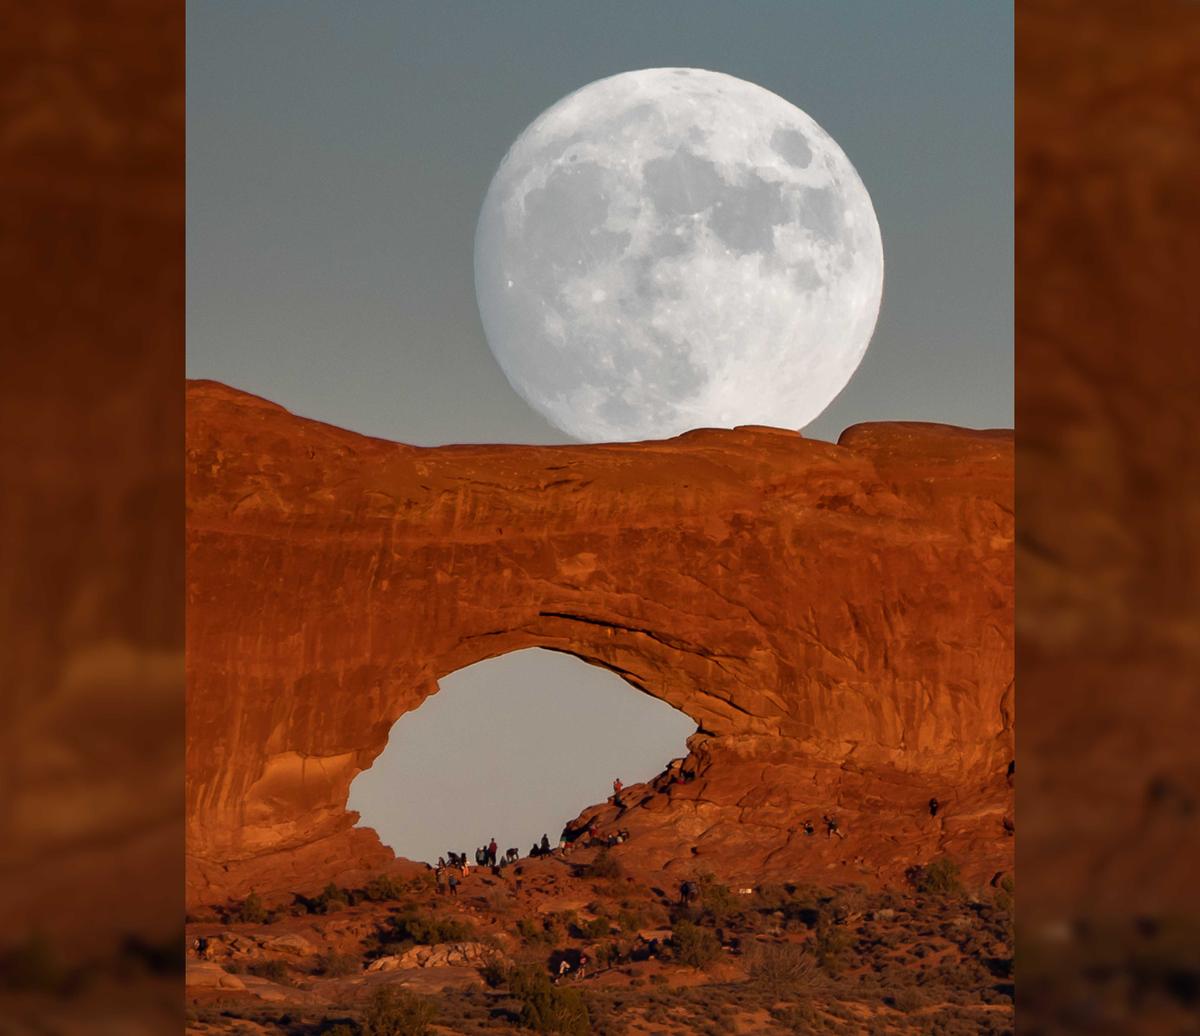 Zach Cooley captured the amazing shots at Arches National Park, Utah, on Oct. 28. (Caters News)